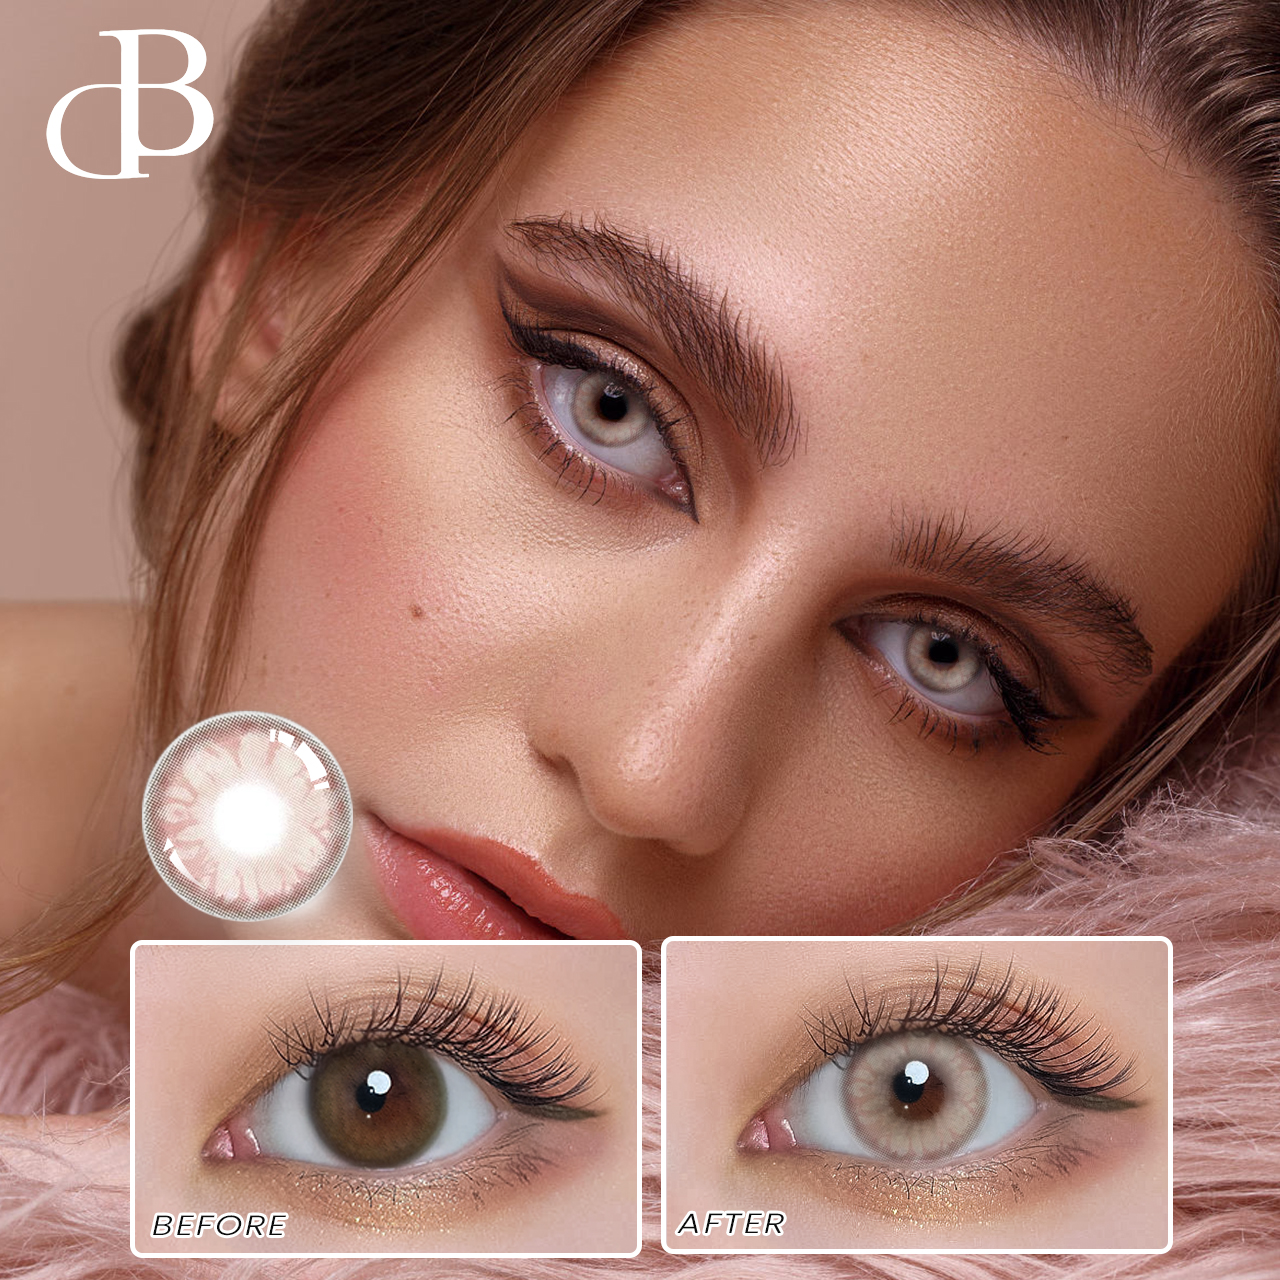 DB Yearly color sensual beauty lenses branclear color contact lenses